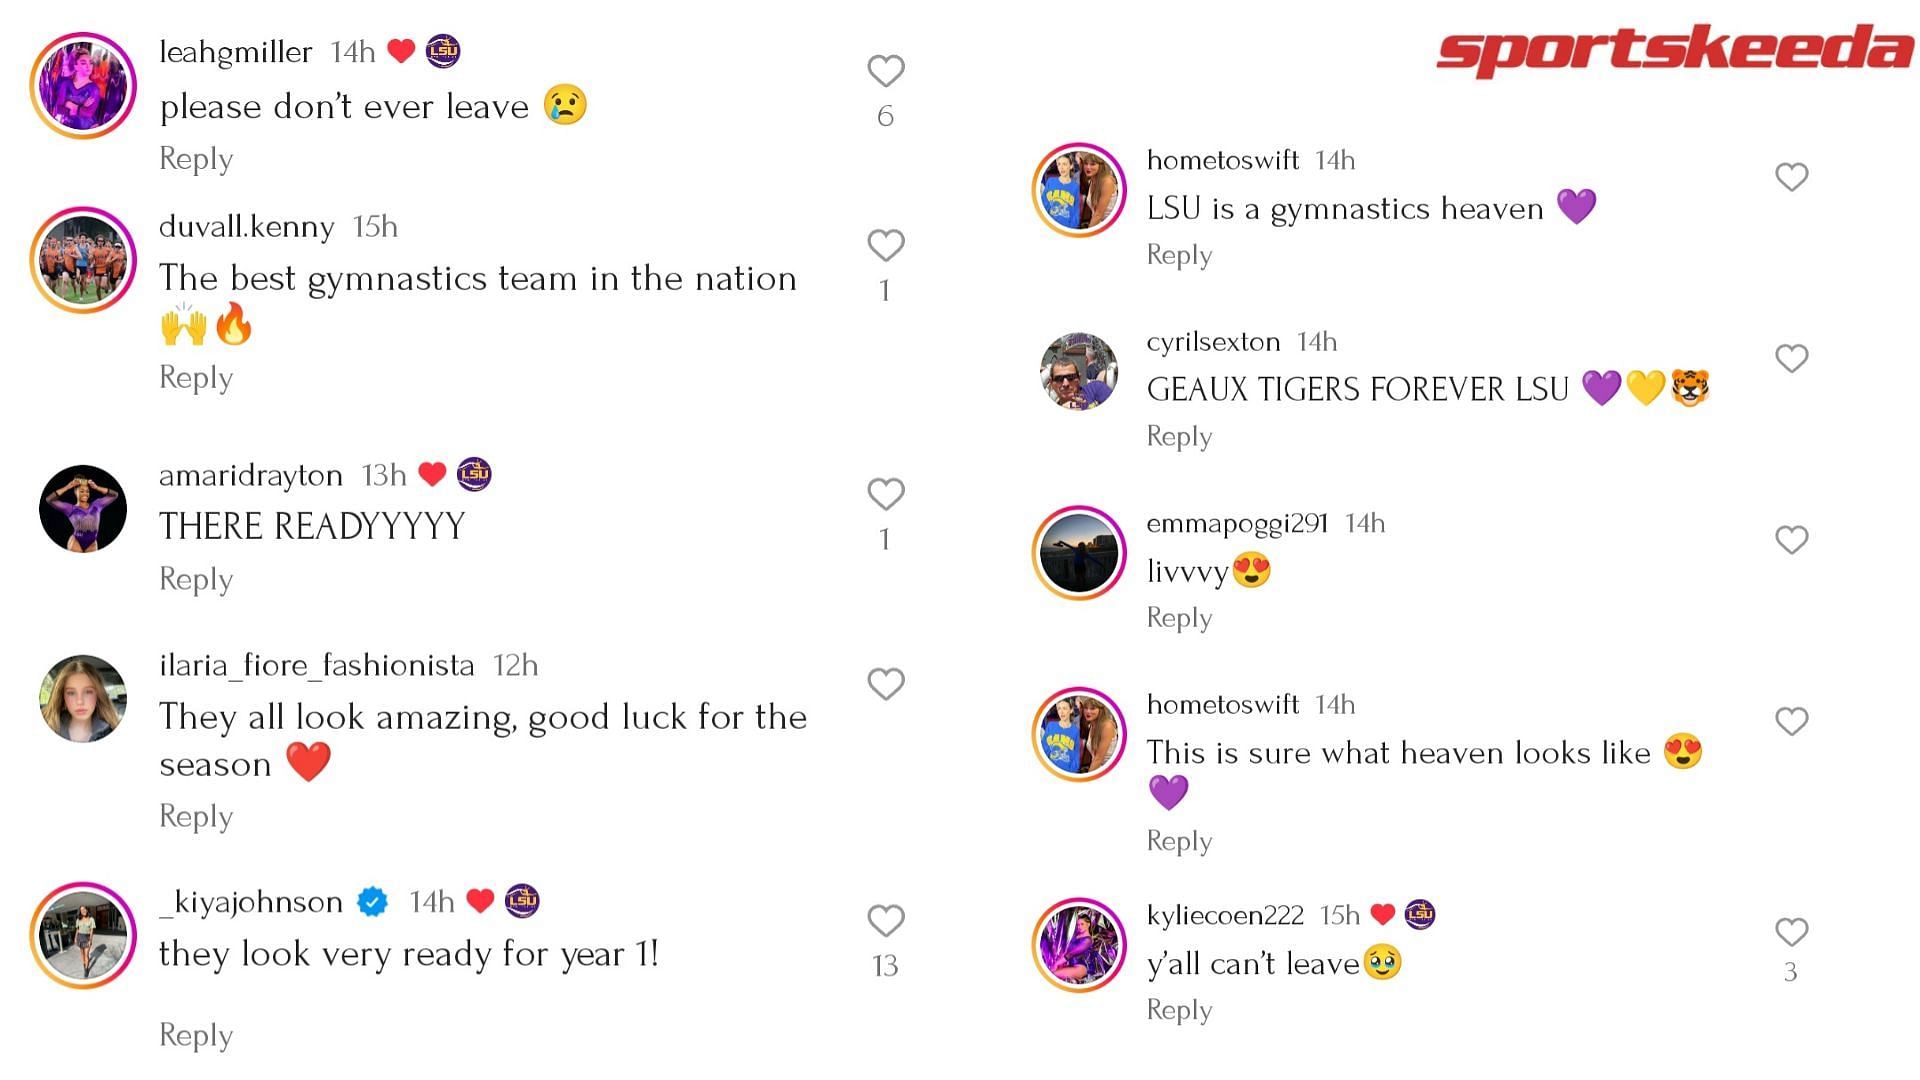 Fans on Instagram were full of praise for Olivia Dunne and LSU teammates